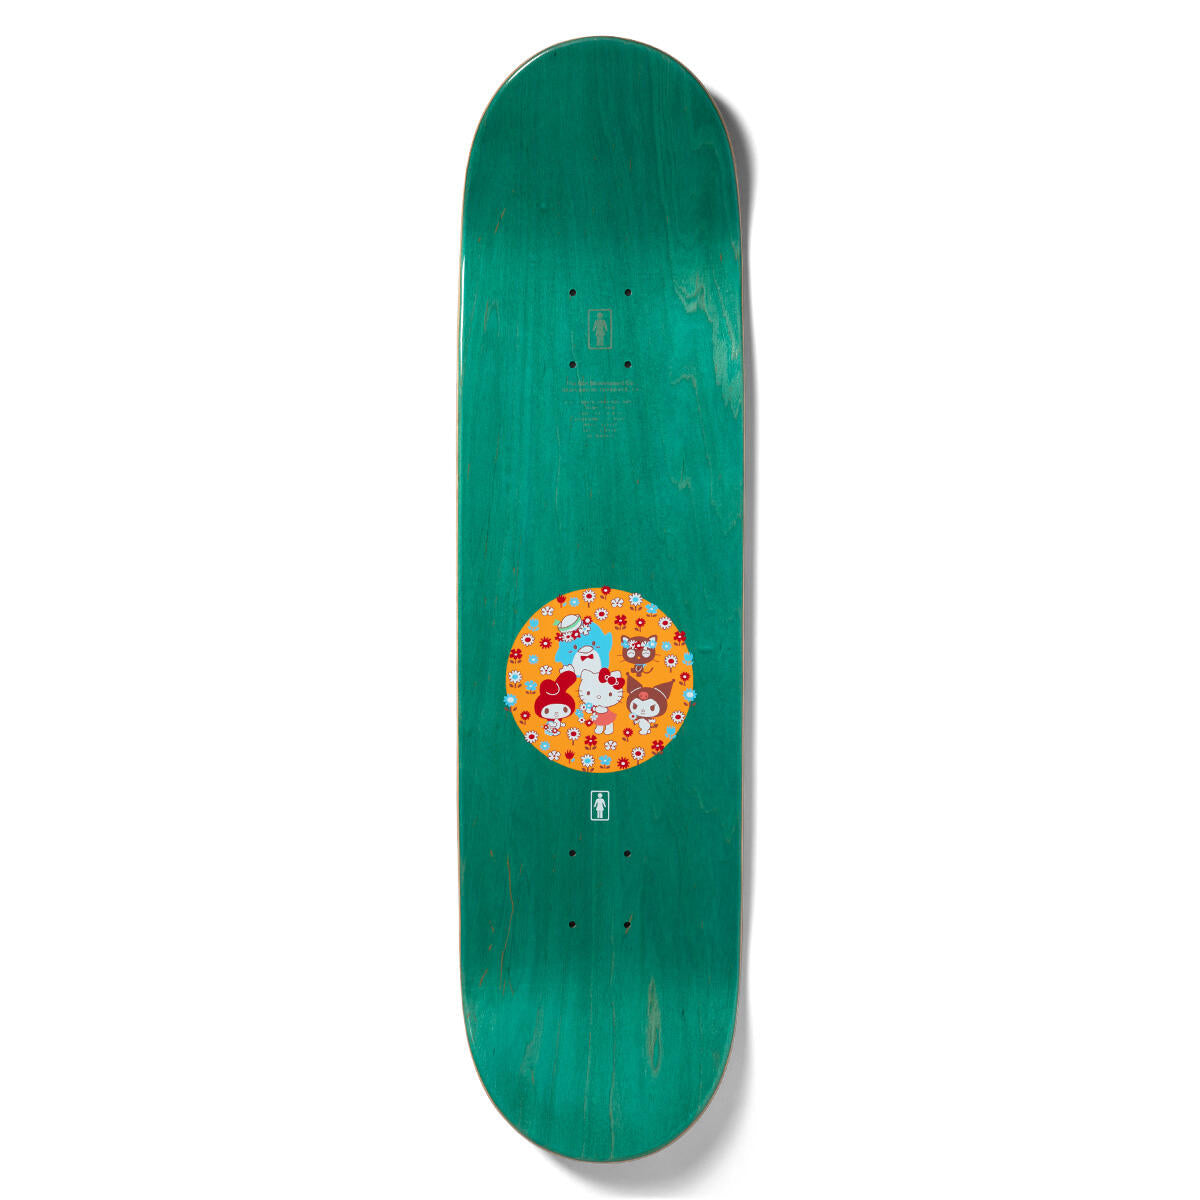 GIRL SKATEBOARDS GASS HELLO KITTY AND FRIENDS DECK 8.25